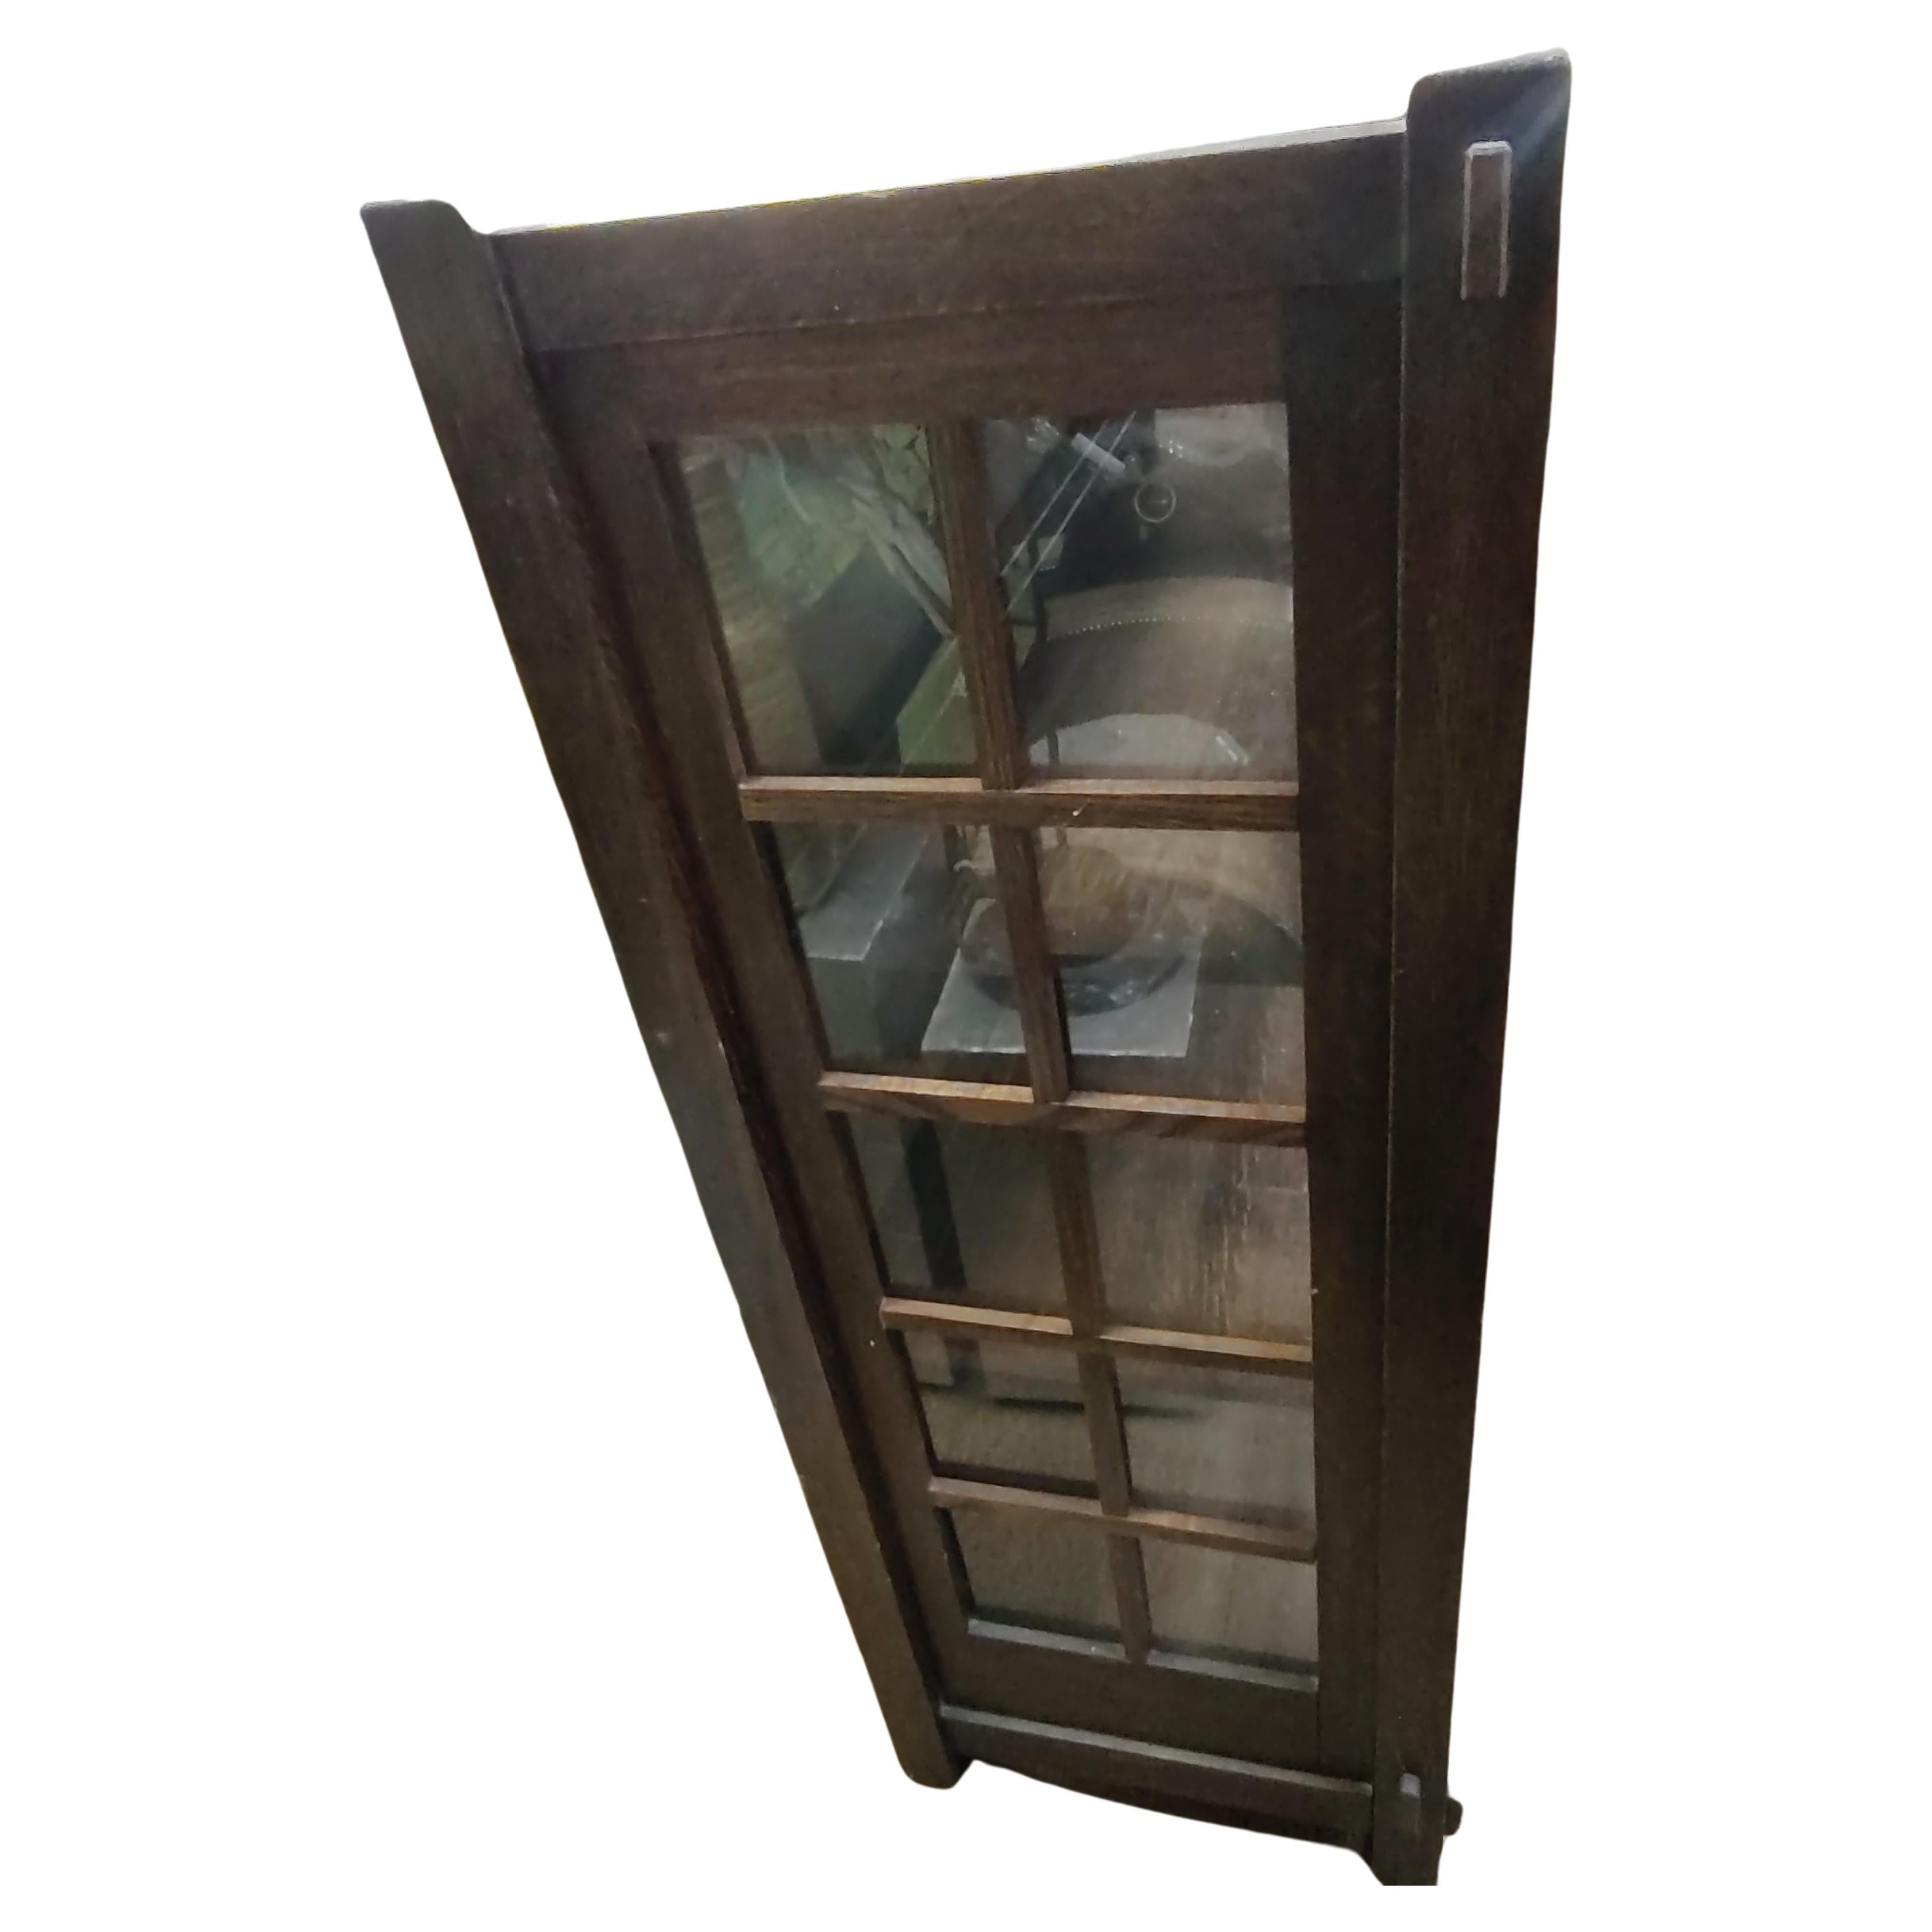 Arts and Crafts Arts & Crafts Mission Oak Two Door Bookcase China Closet C1910 Original Finish For Sale